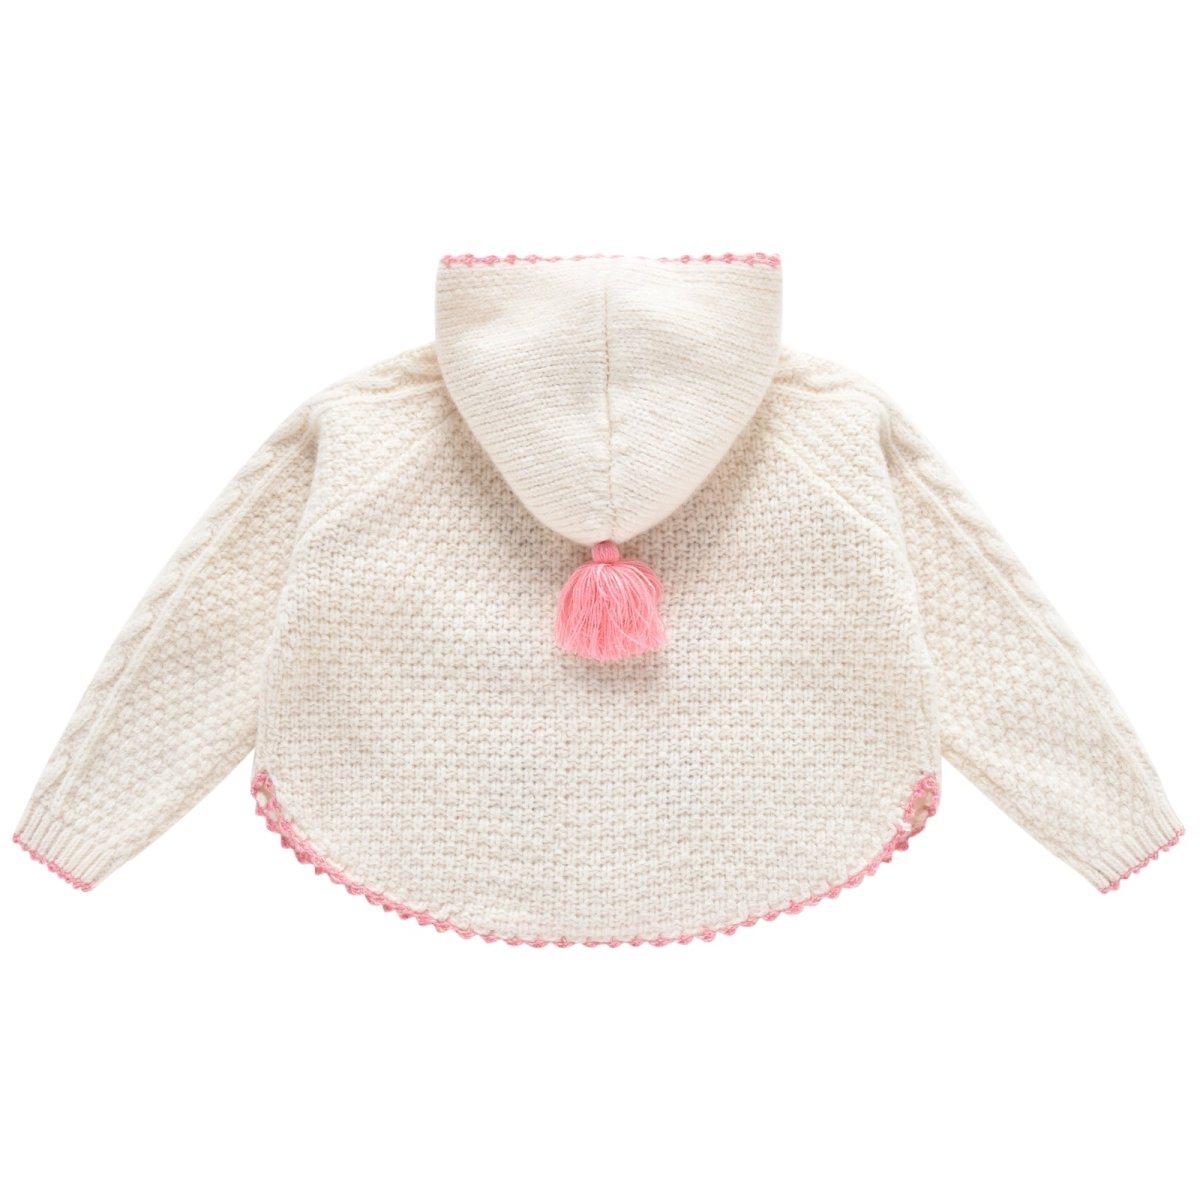 CLARA KNITTED HOODED JACKET (PREORDER) - LOUISE MISHA KIDS